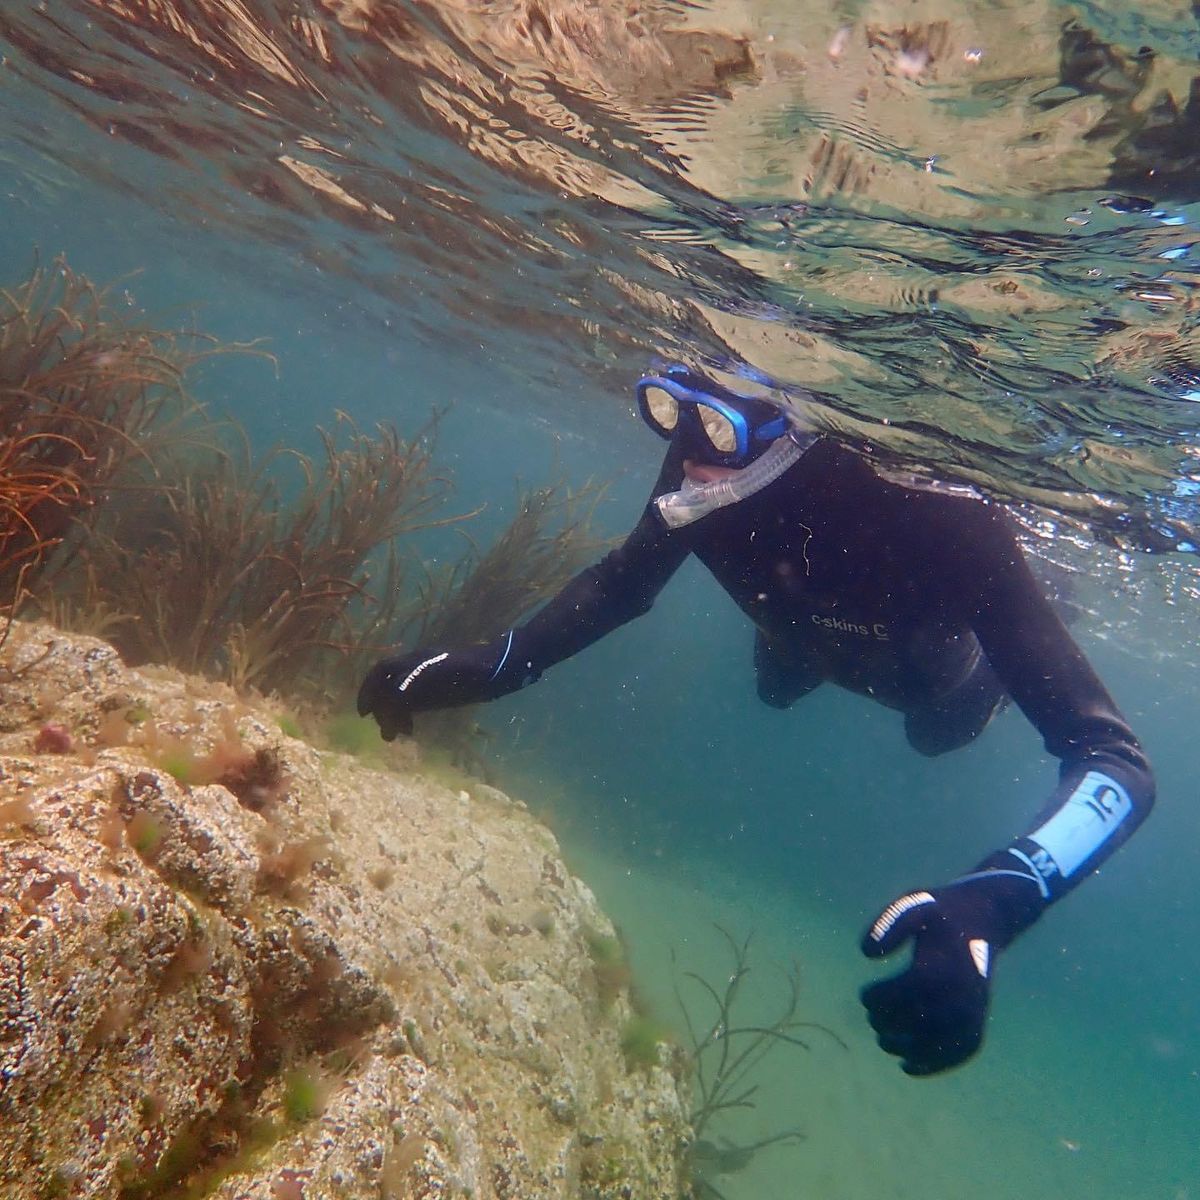 Discover Snorkelling for Beginners- World Snorkelling Day \ud83e\udd3f - Coldingham Bay, Scotland